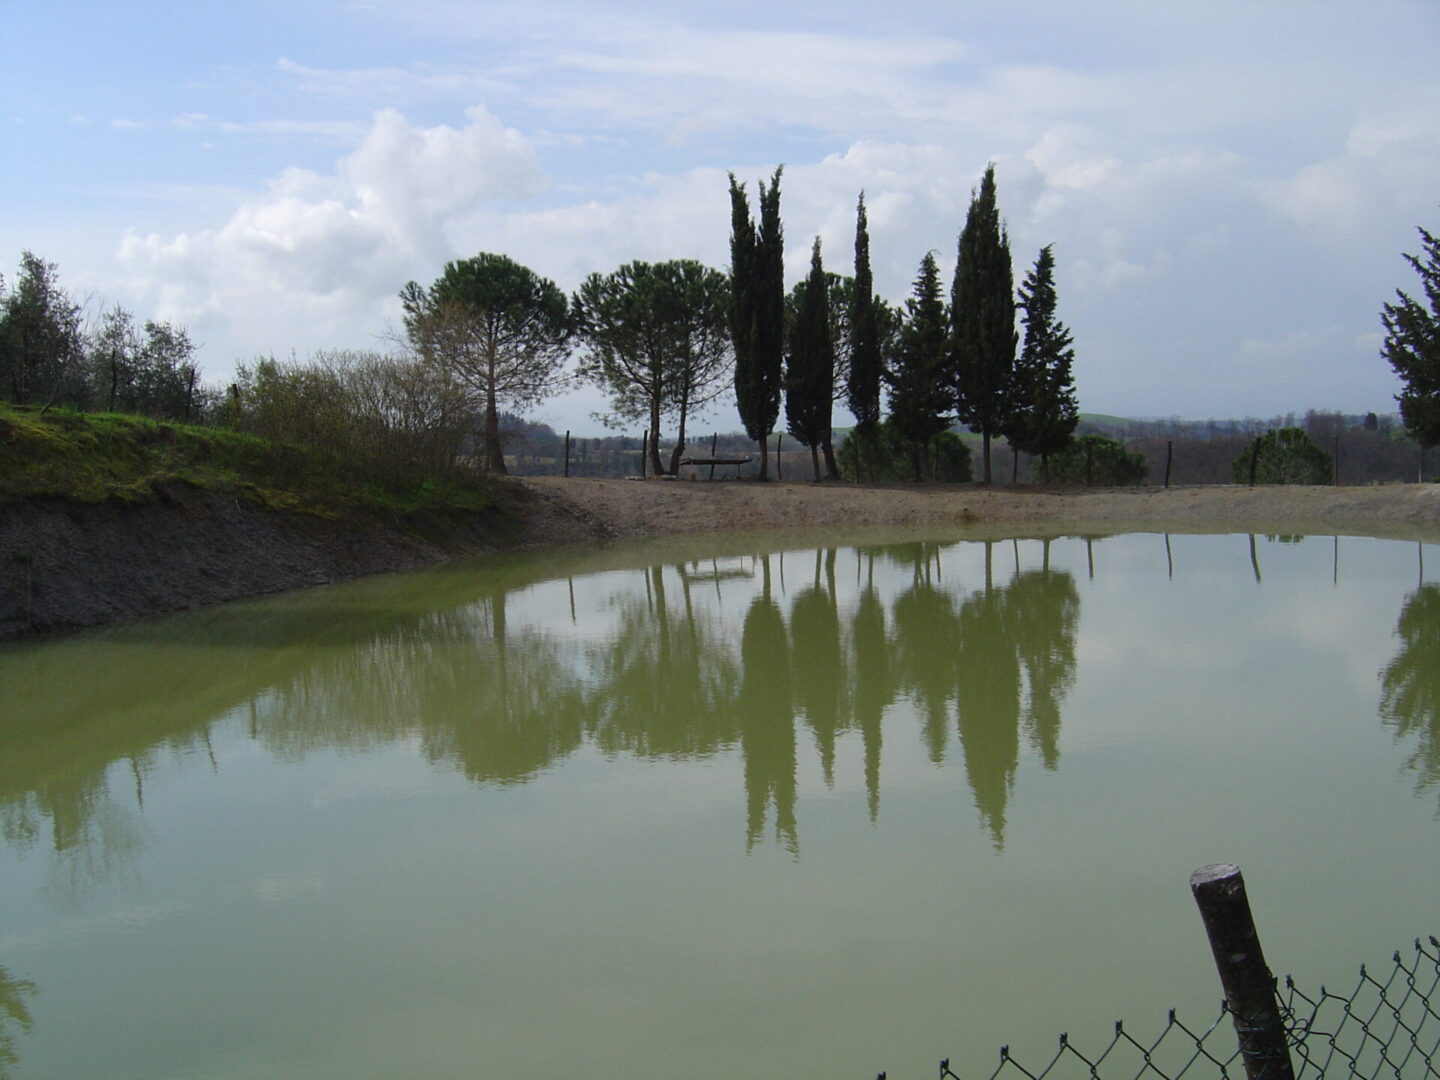 A pond with trees in the background and water